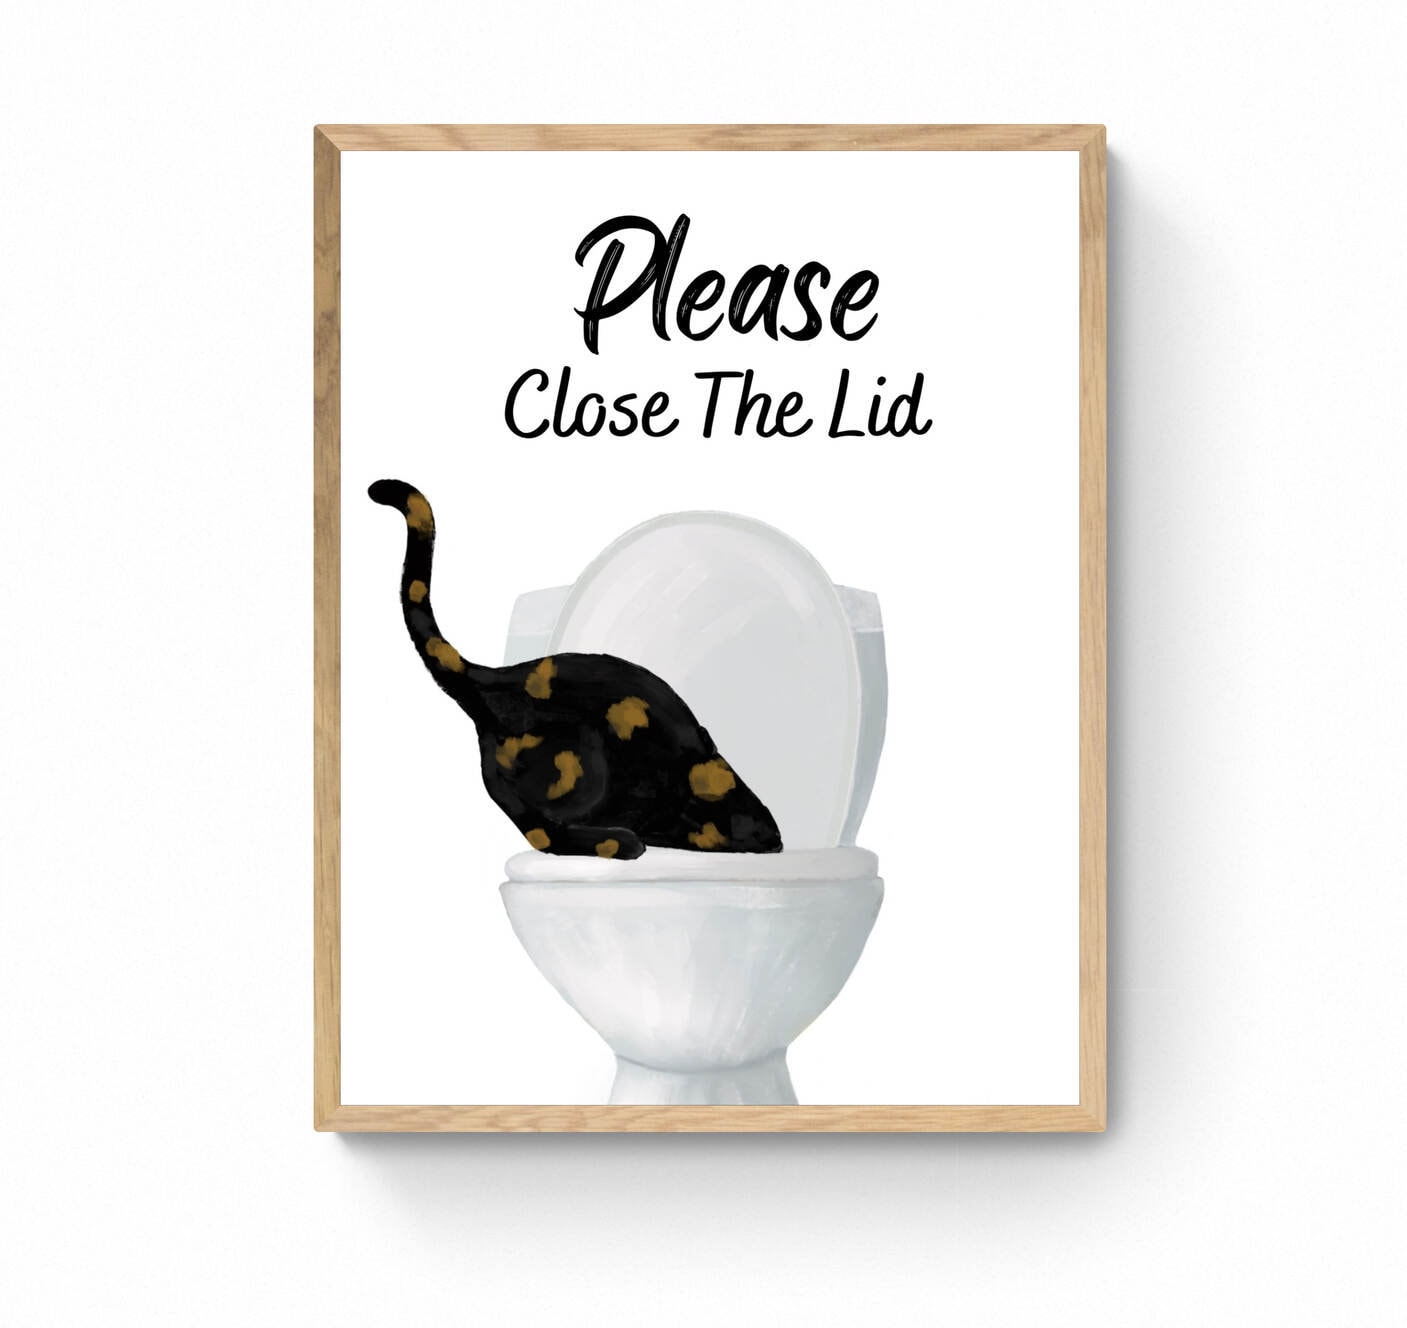 Tortoiseshell Cat Drinking Water From Toilet Sign, Fat Tortie Cat Print, Bathroom Decor, Cat Painting, Kitty Licking Water From Toilet Art,